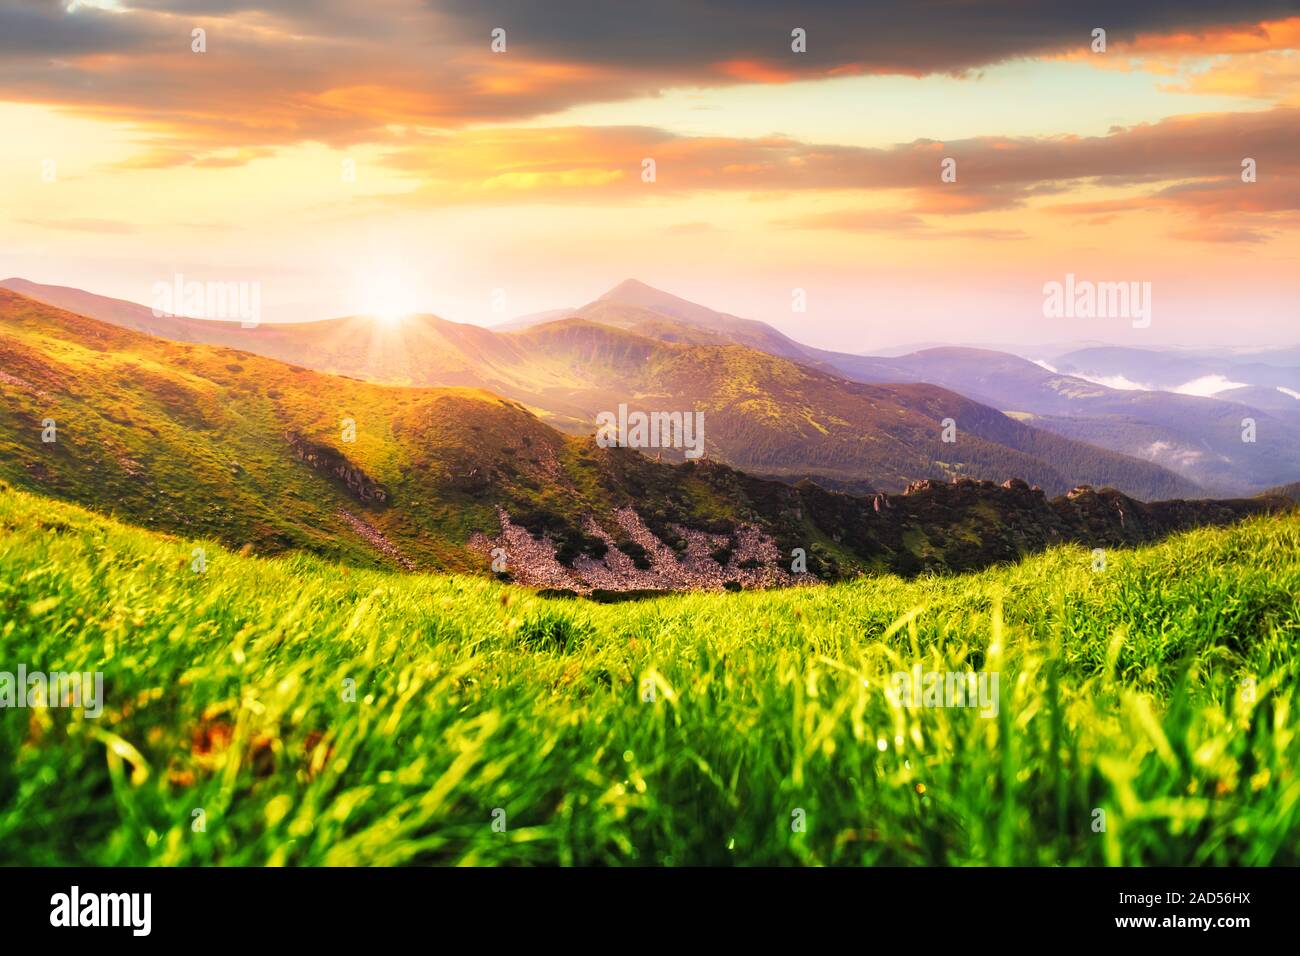 Summer Mountain Landscape In Carpathians Green Grass And Mountains